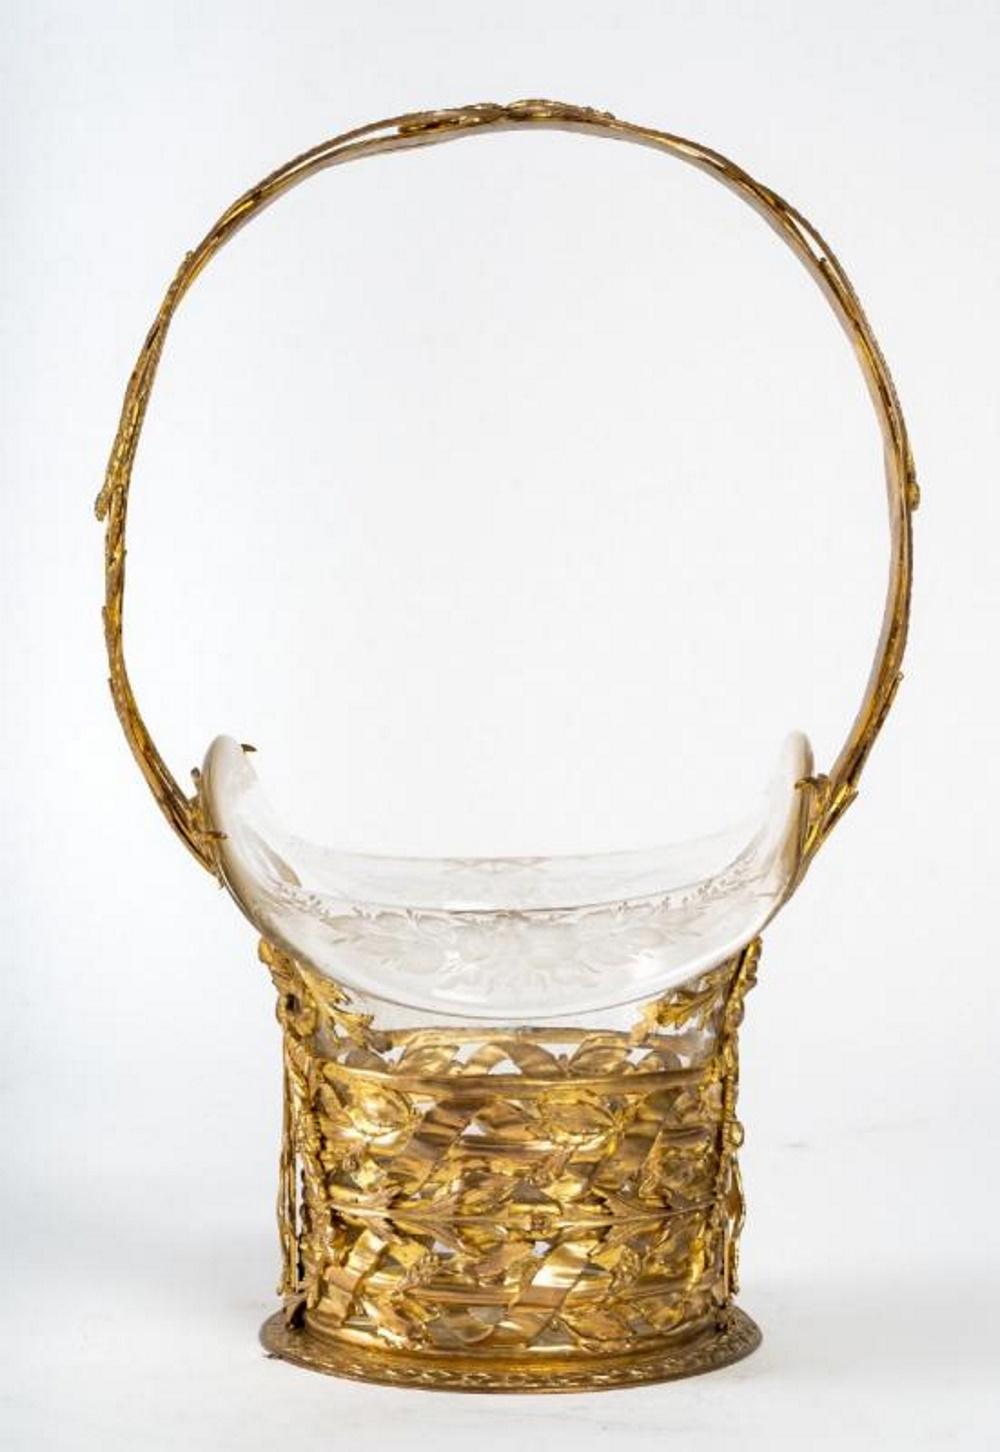 Late 19th Century 19th Century Gilt Bronze and Crystal Basket